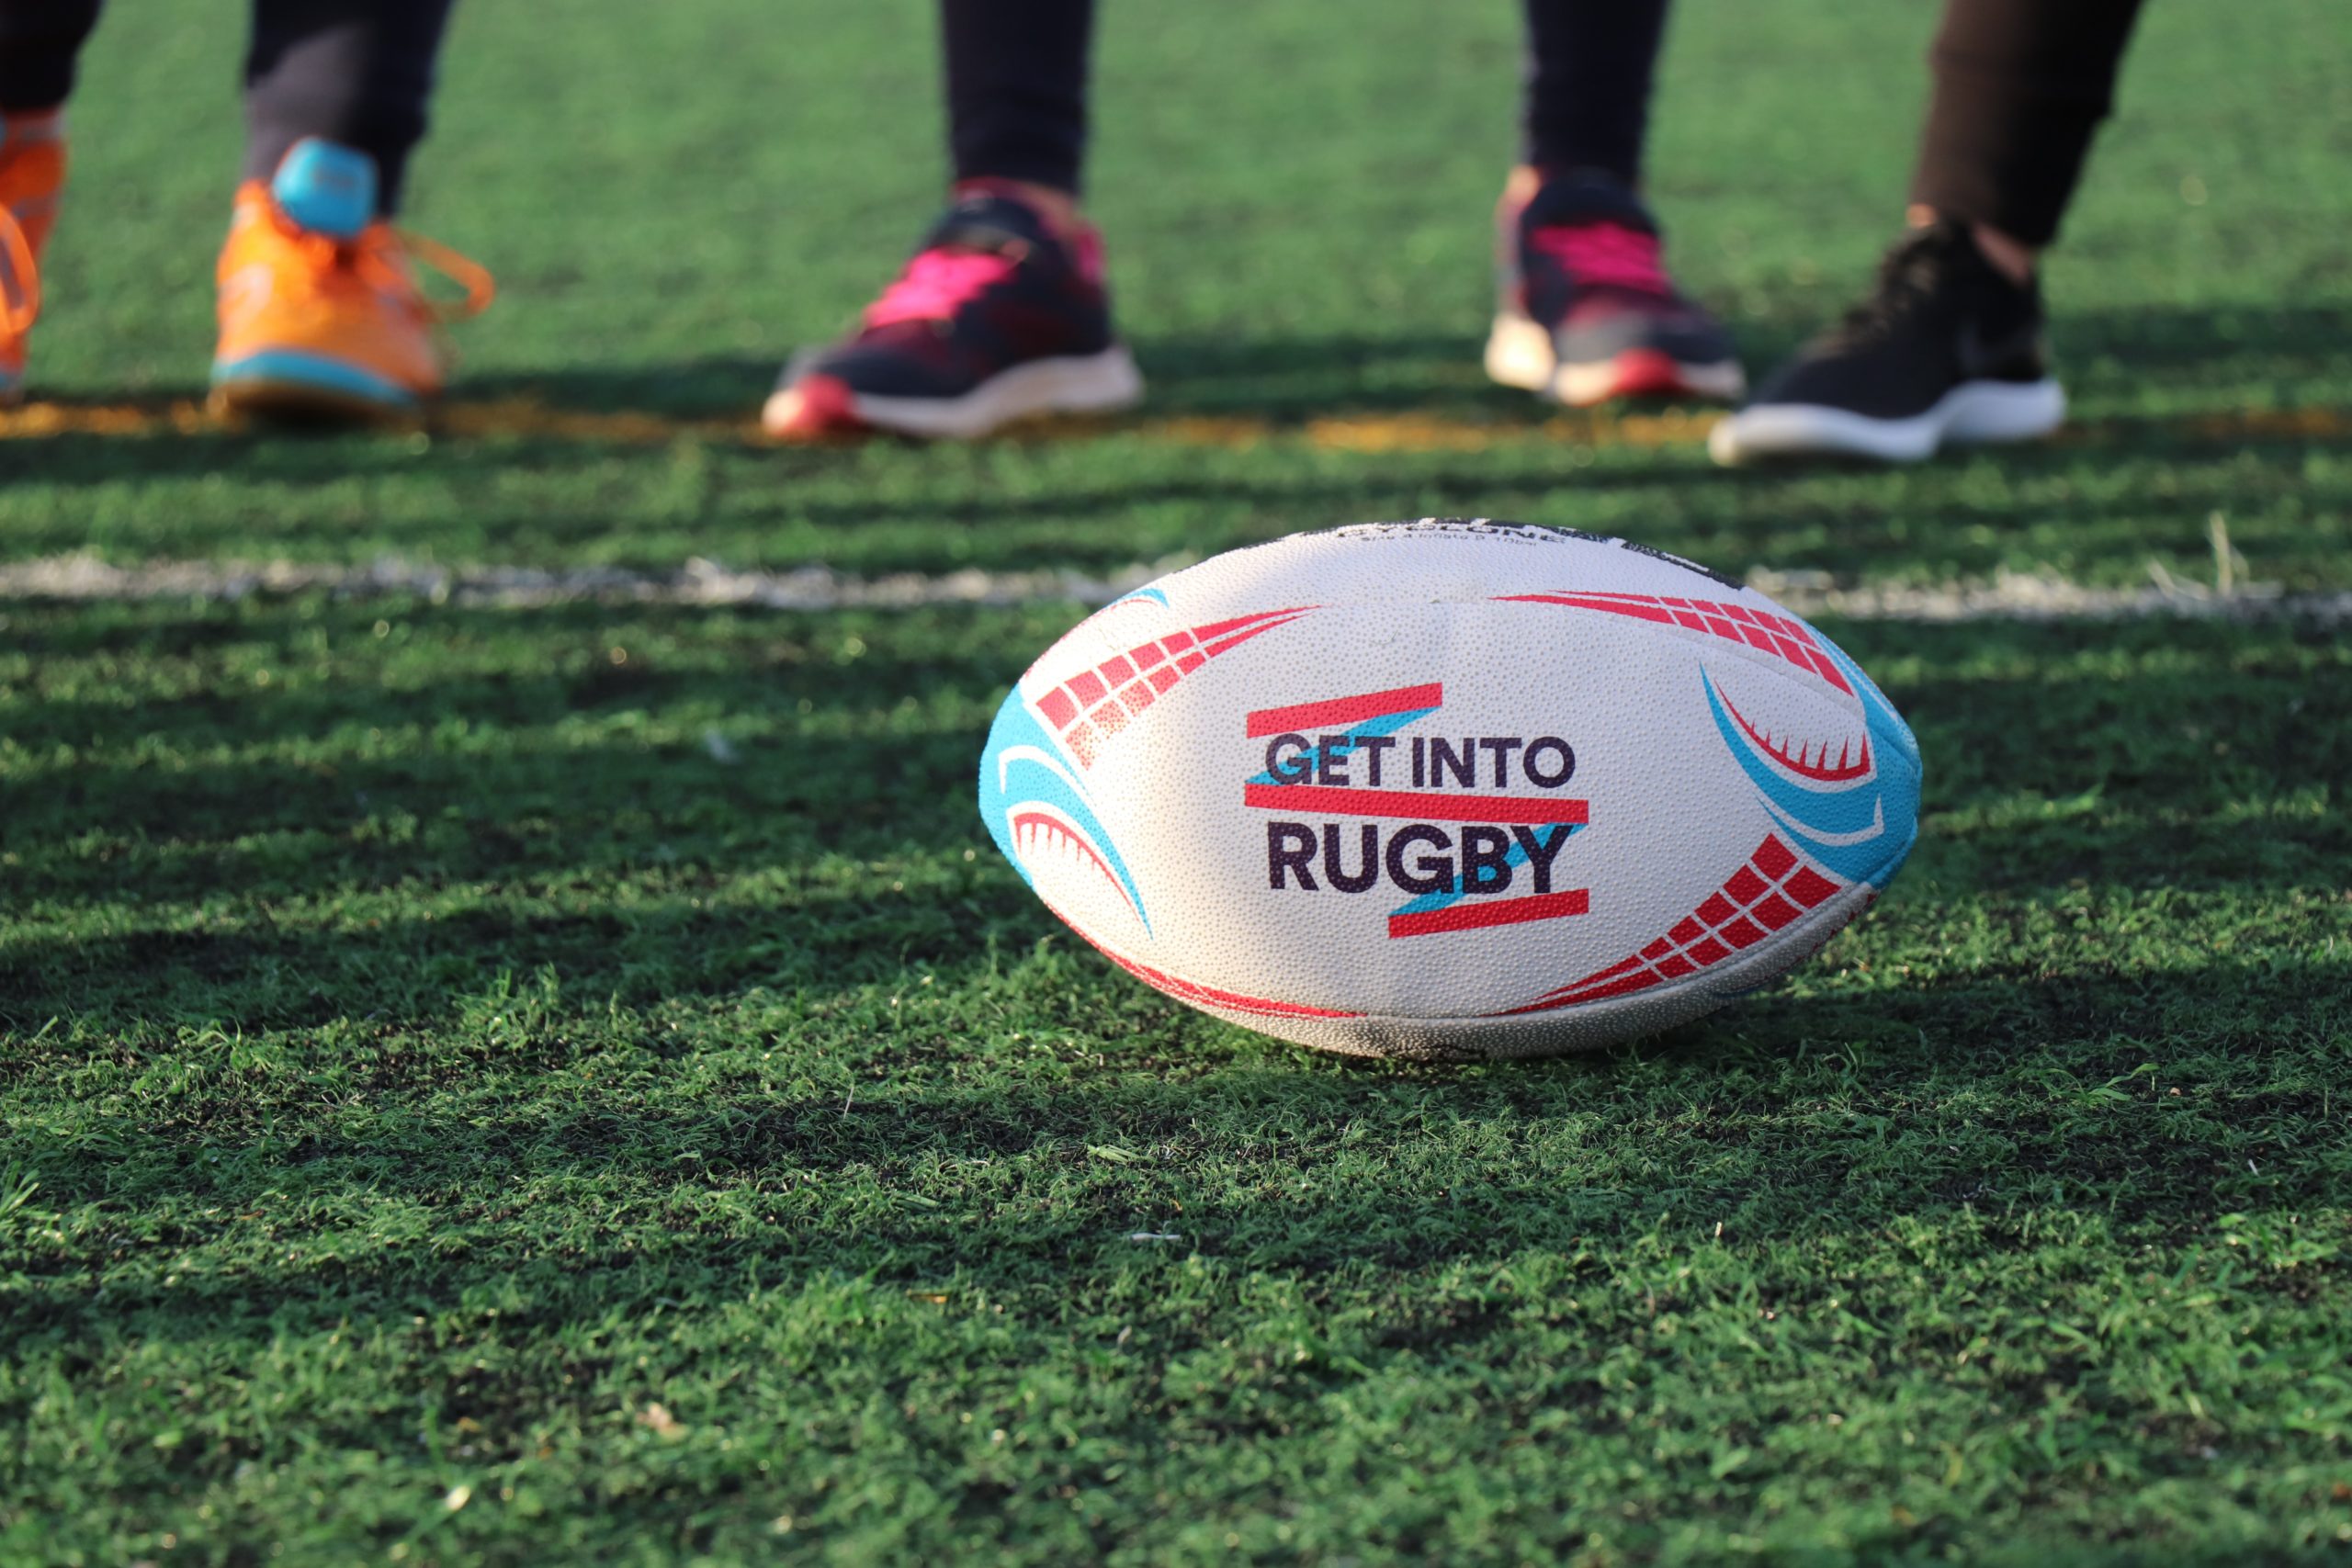 A rugby ball on a pitch